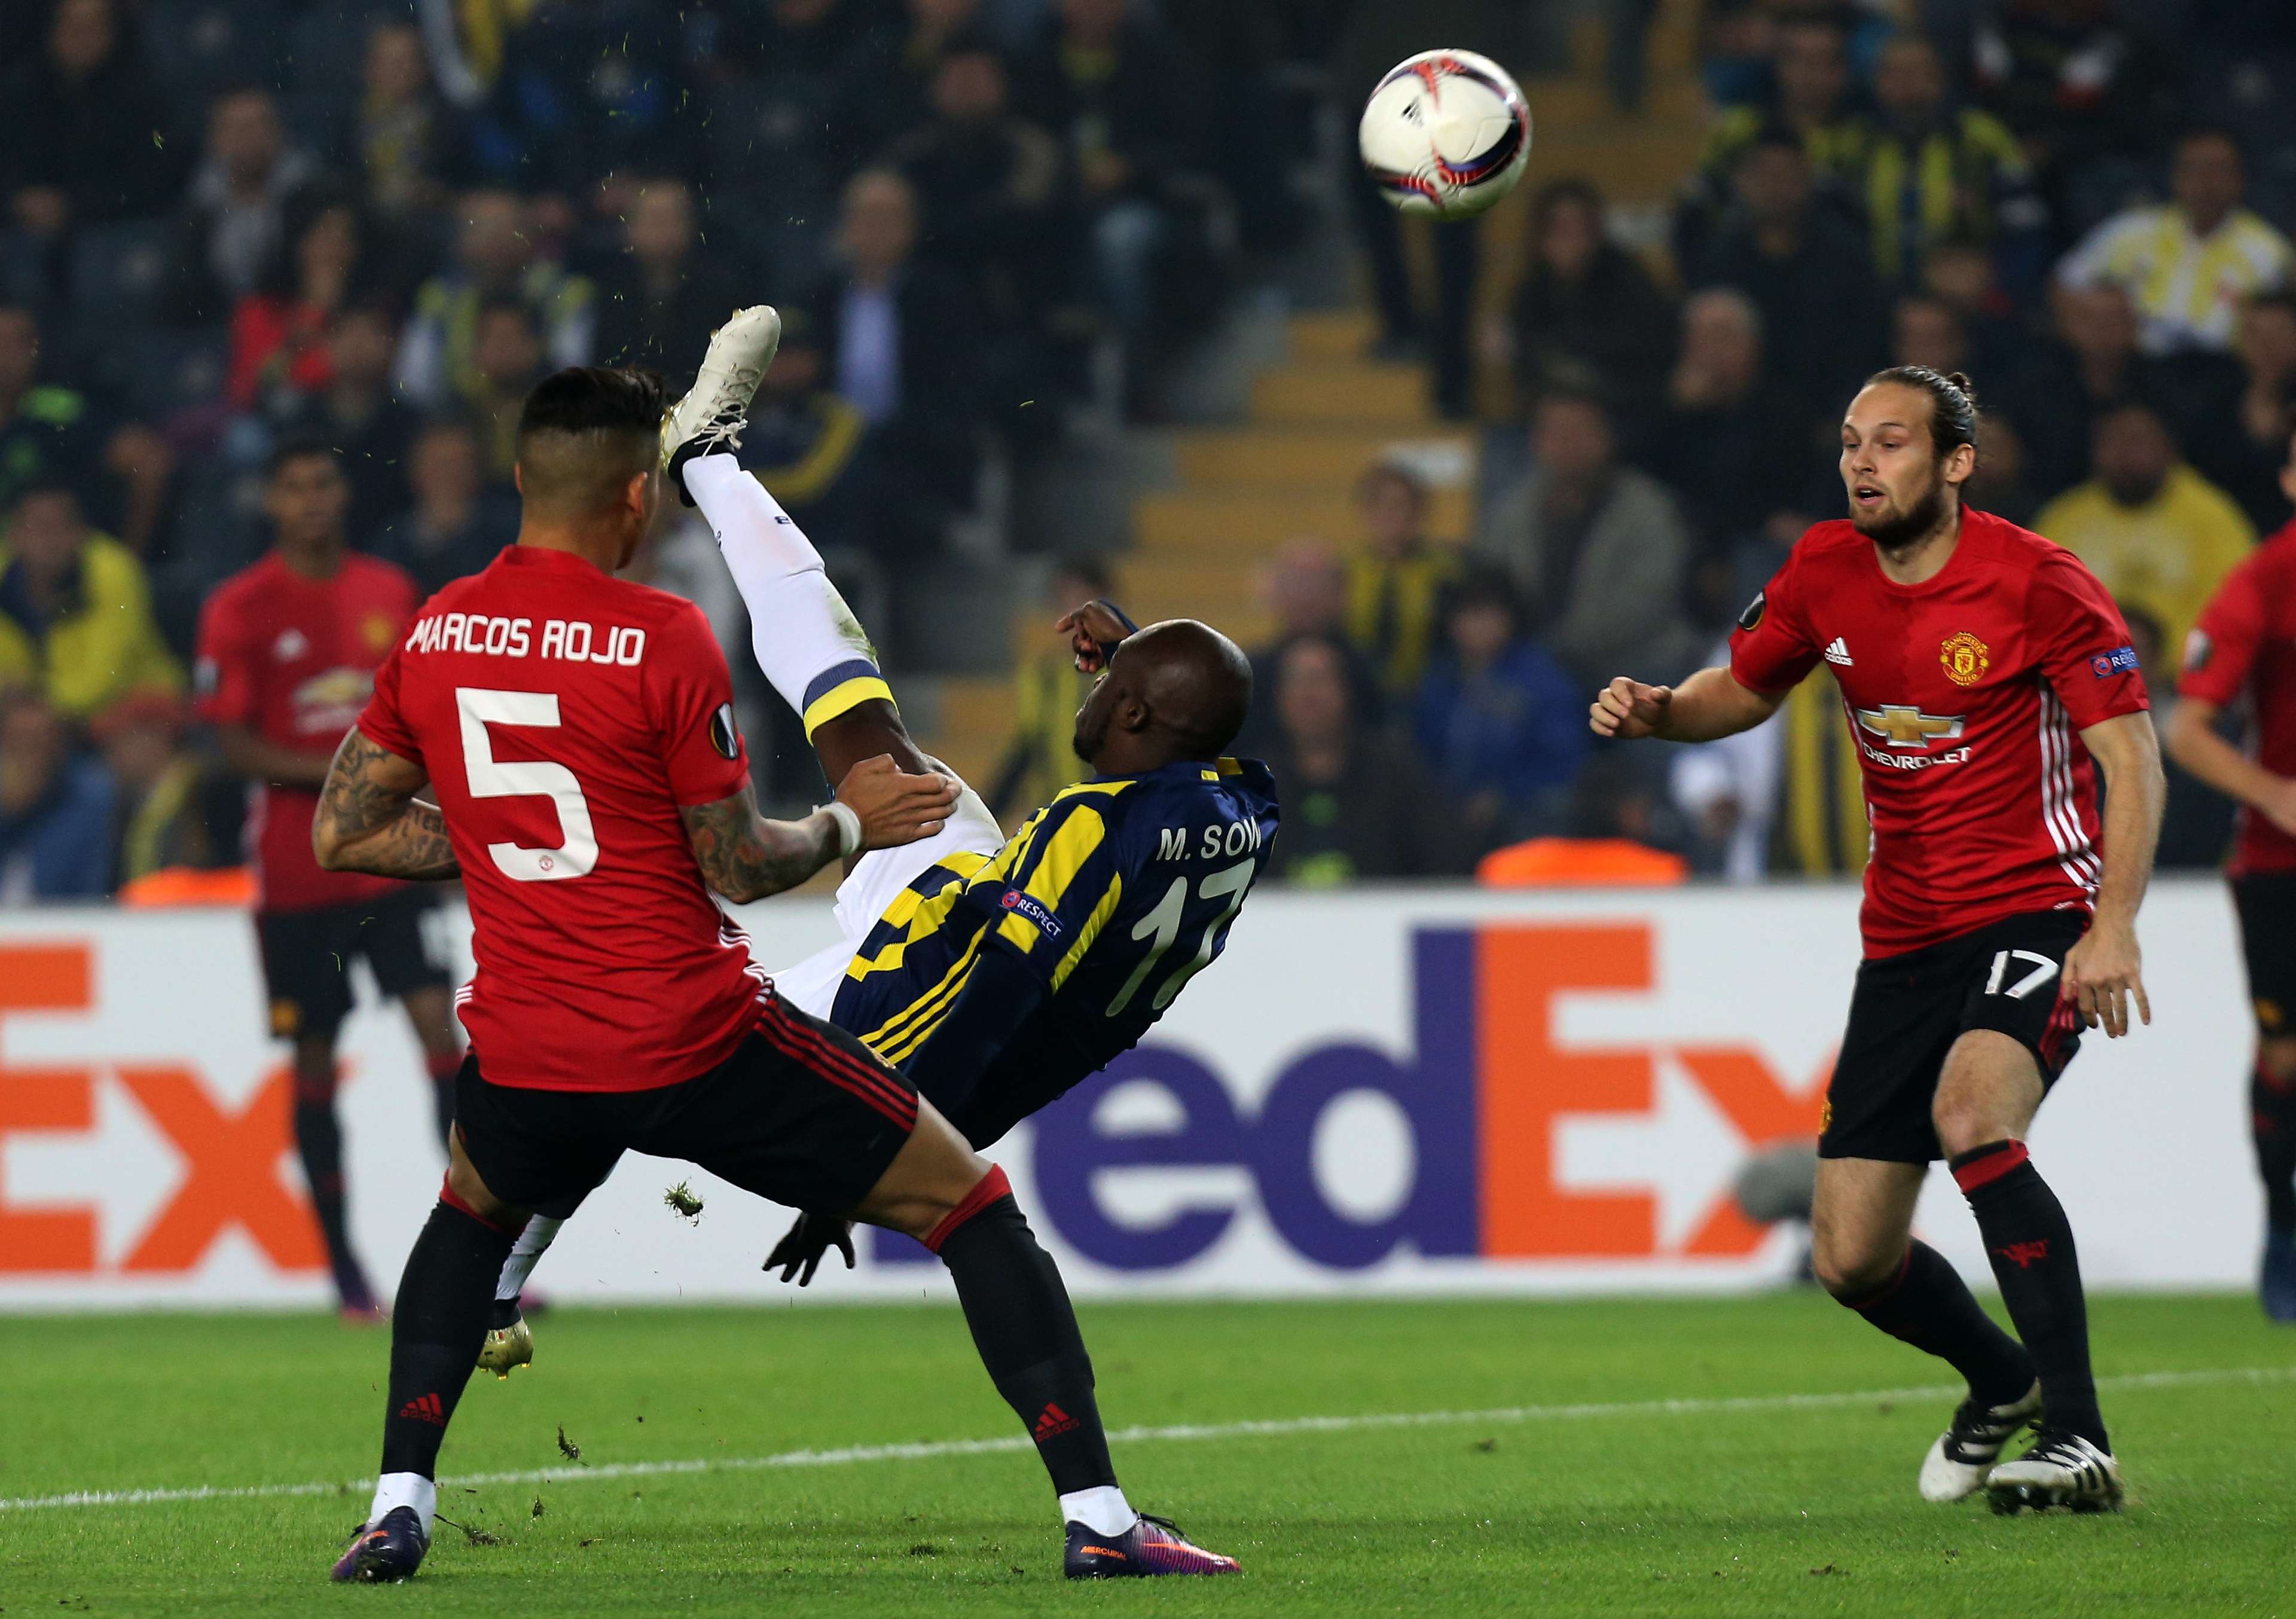 Moussa Sow Fenerbahce Manchester United